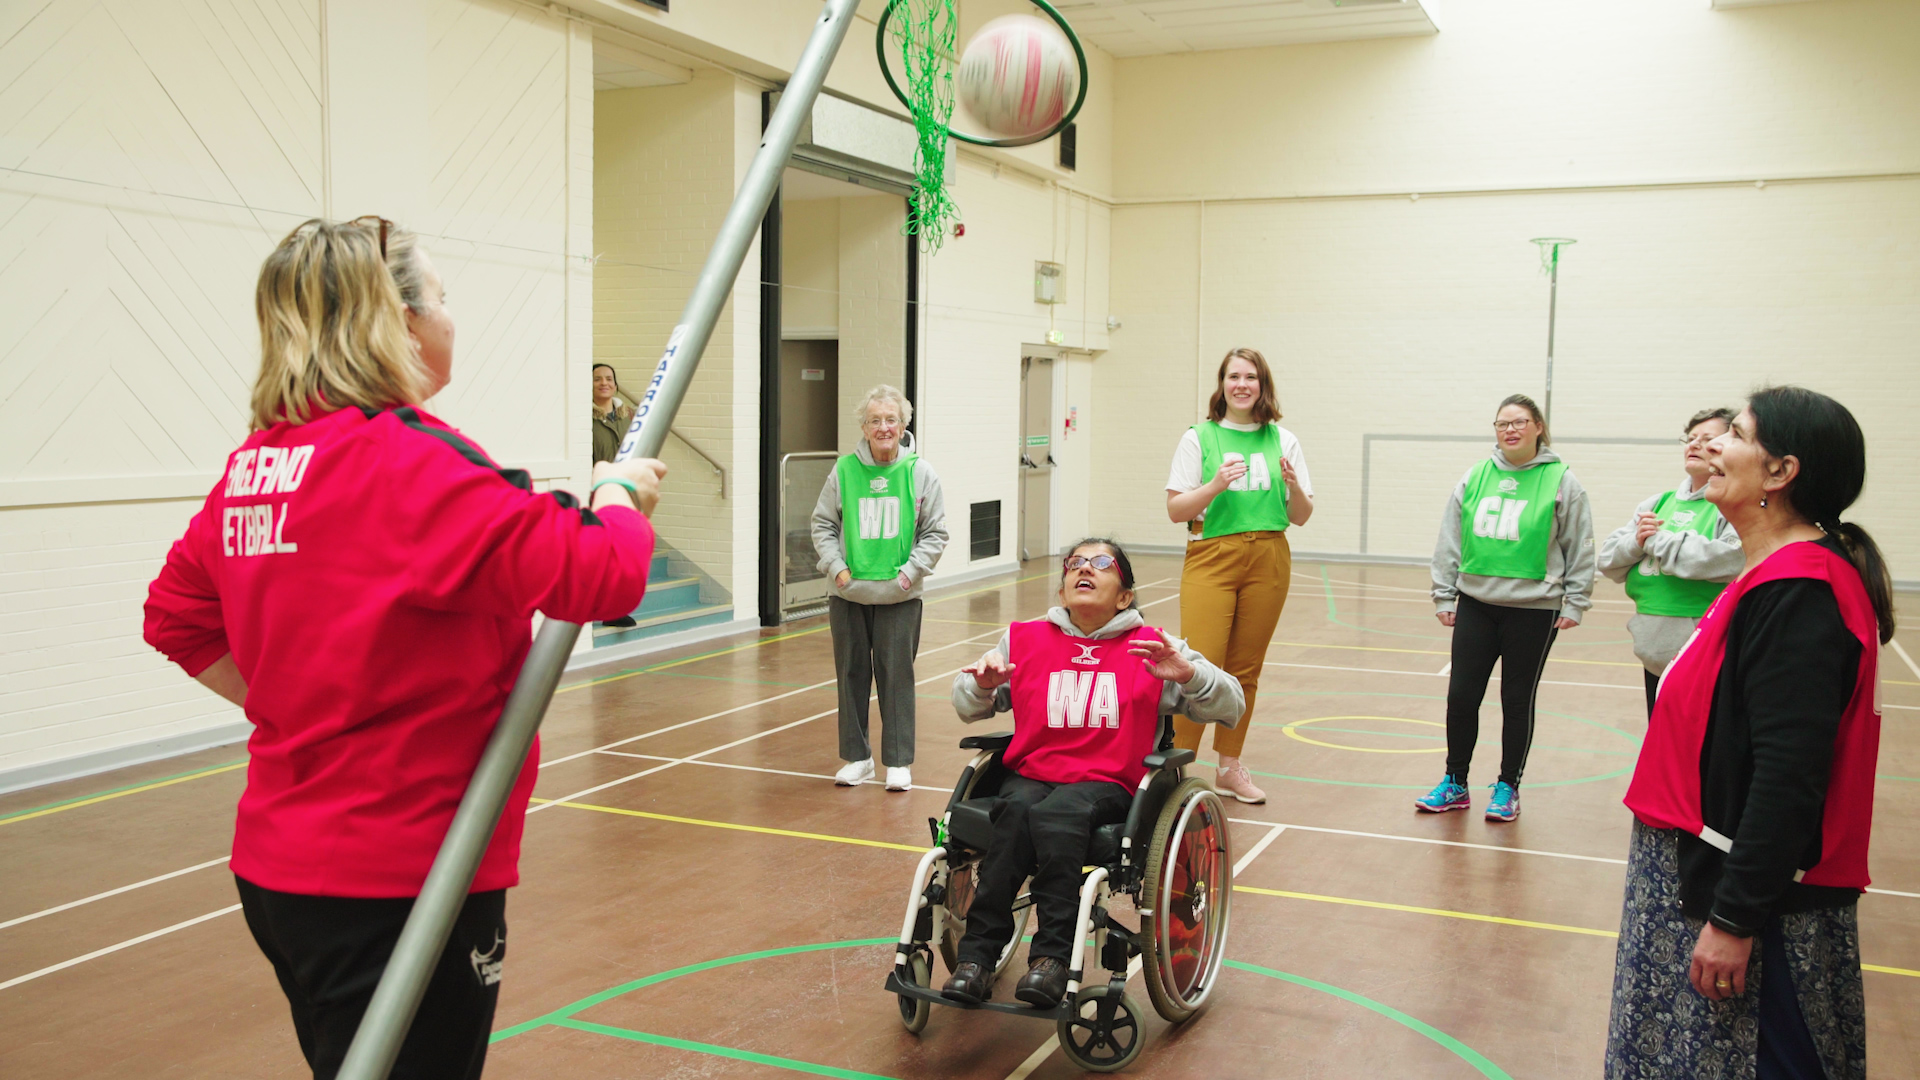 Wheelchair user shoots goal in inclusive netball session